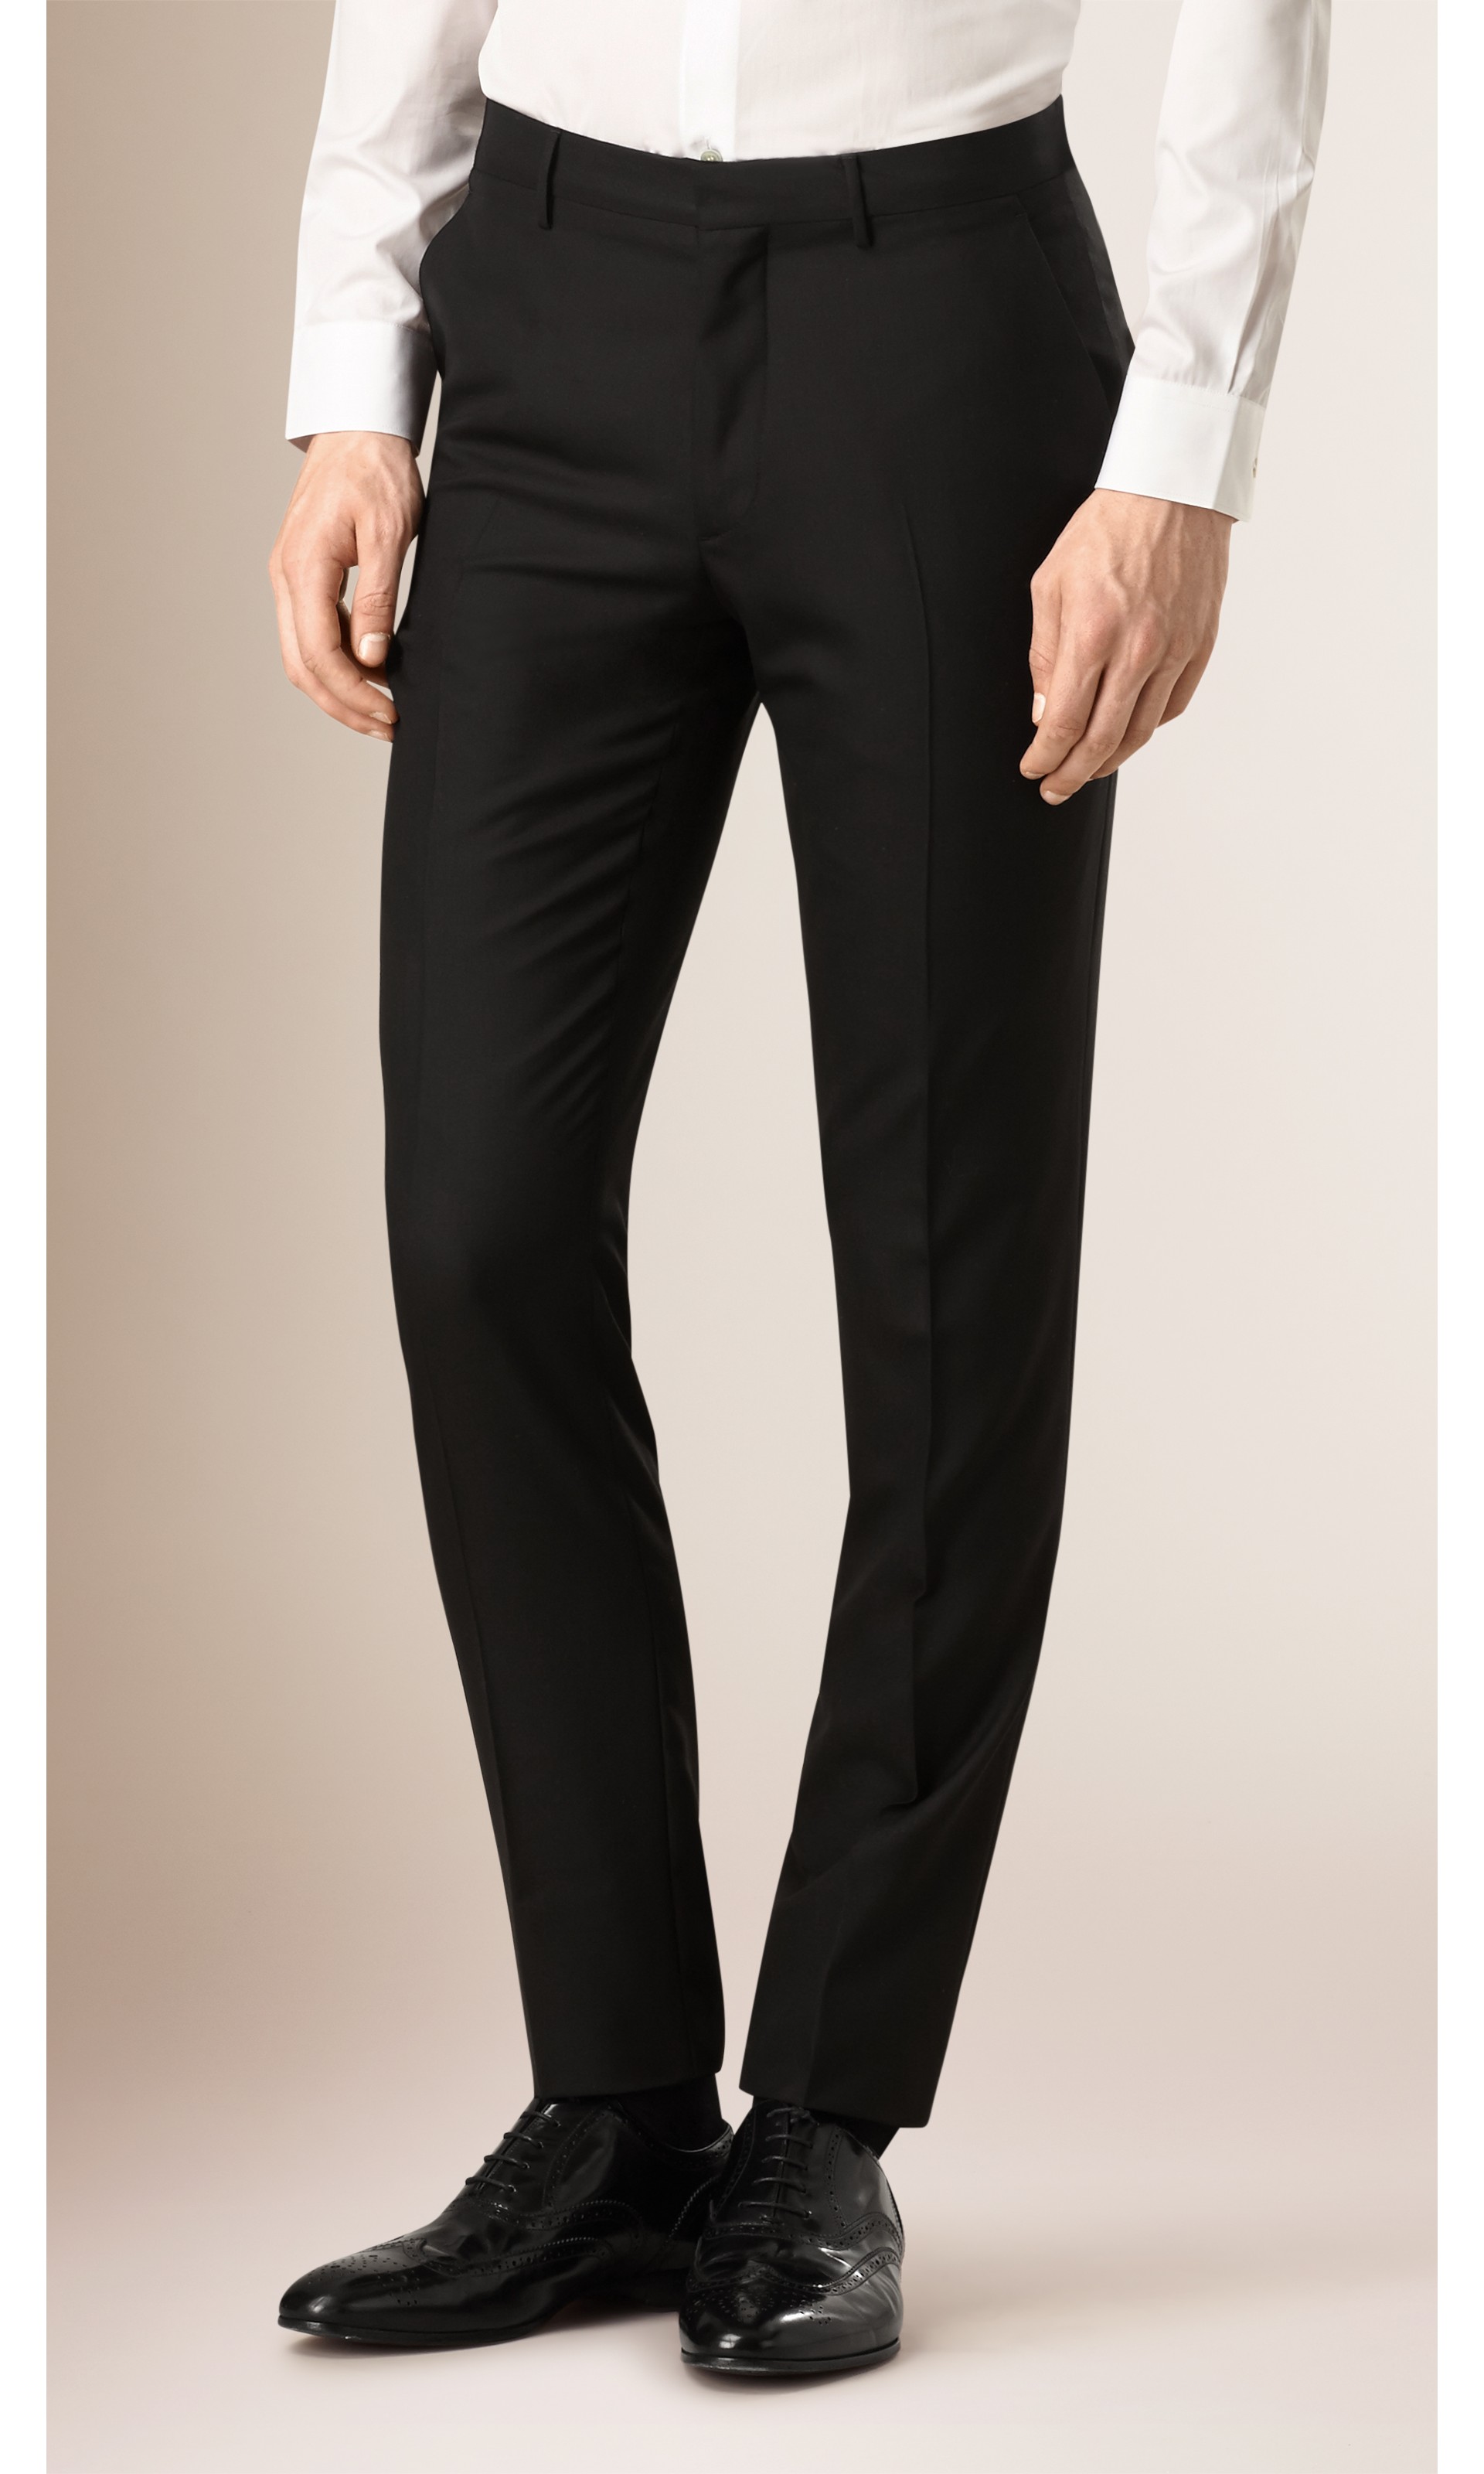 Slim Fit Wool Trousers in Black - Men | Burberry United States